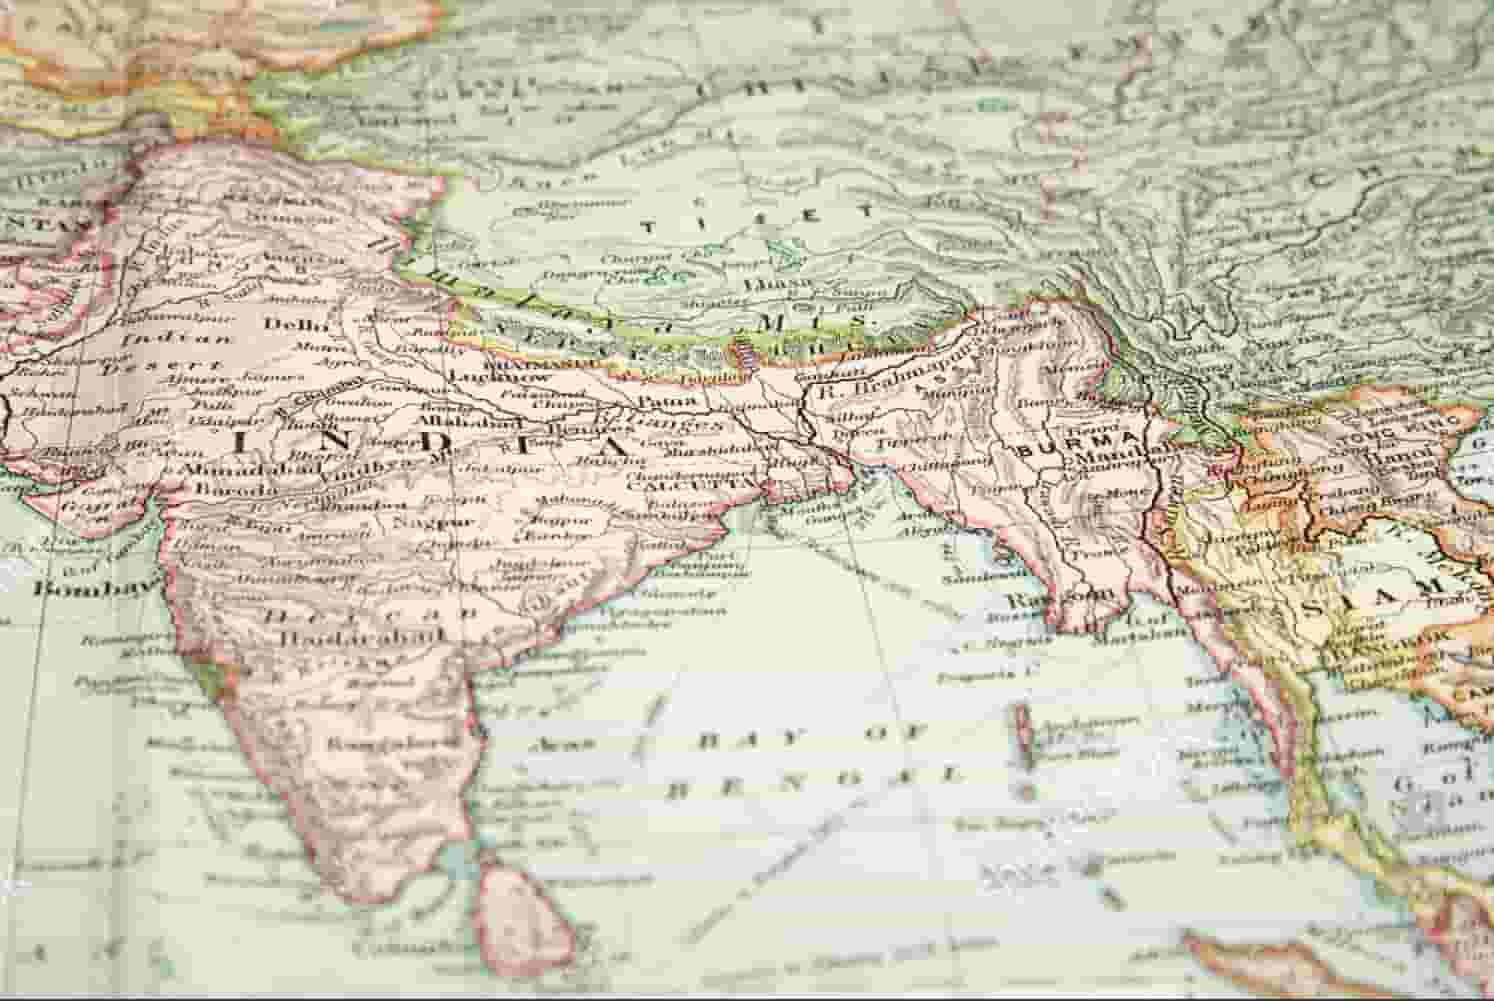 Old Map of India